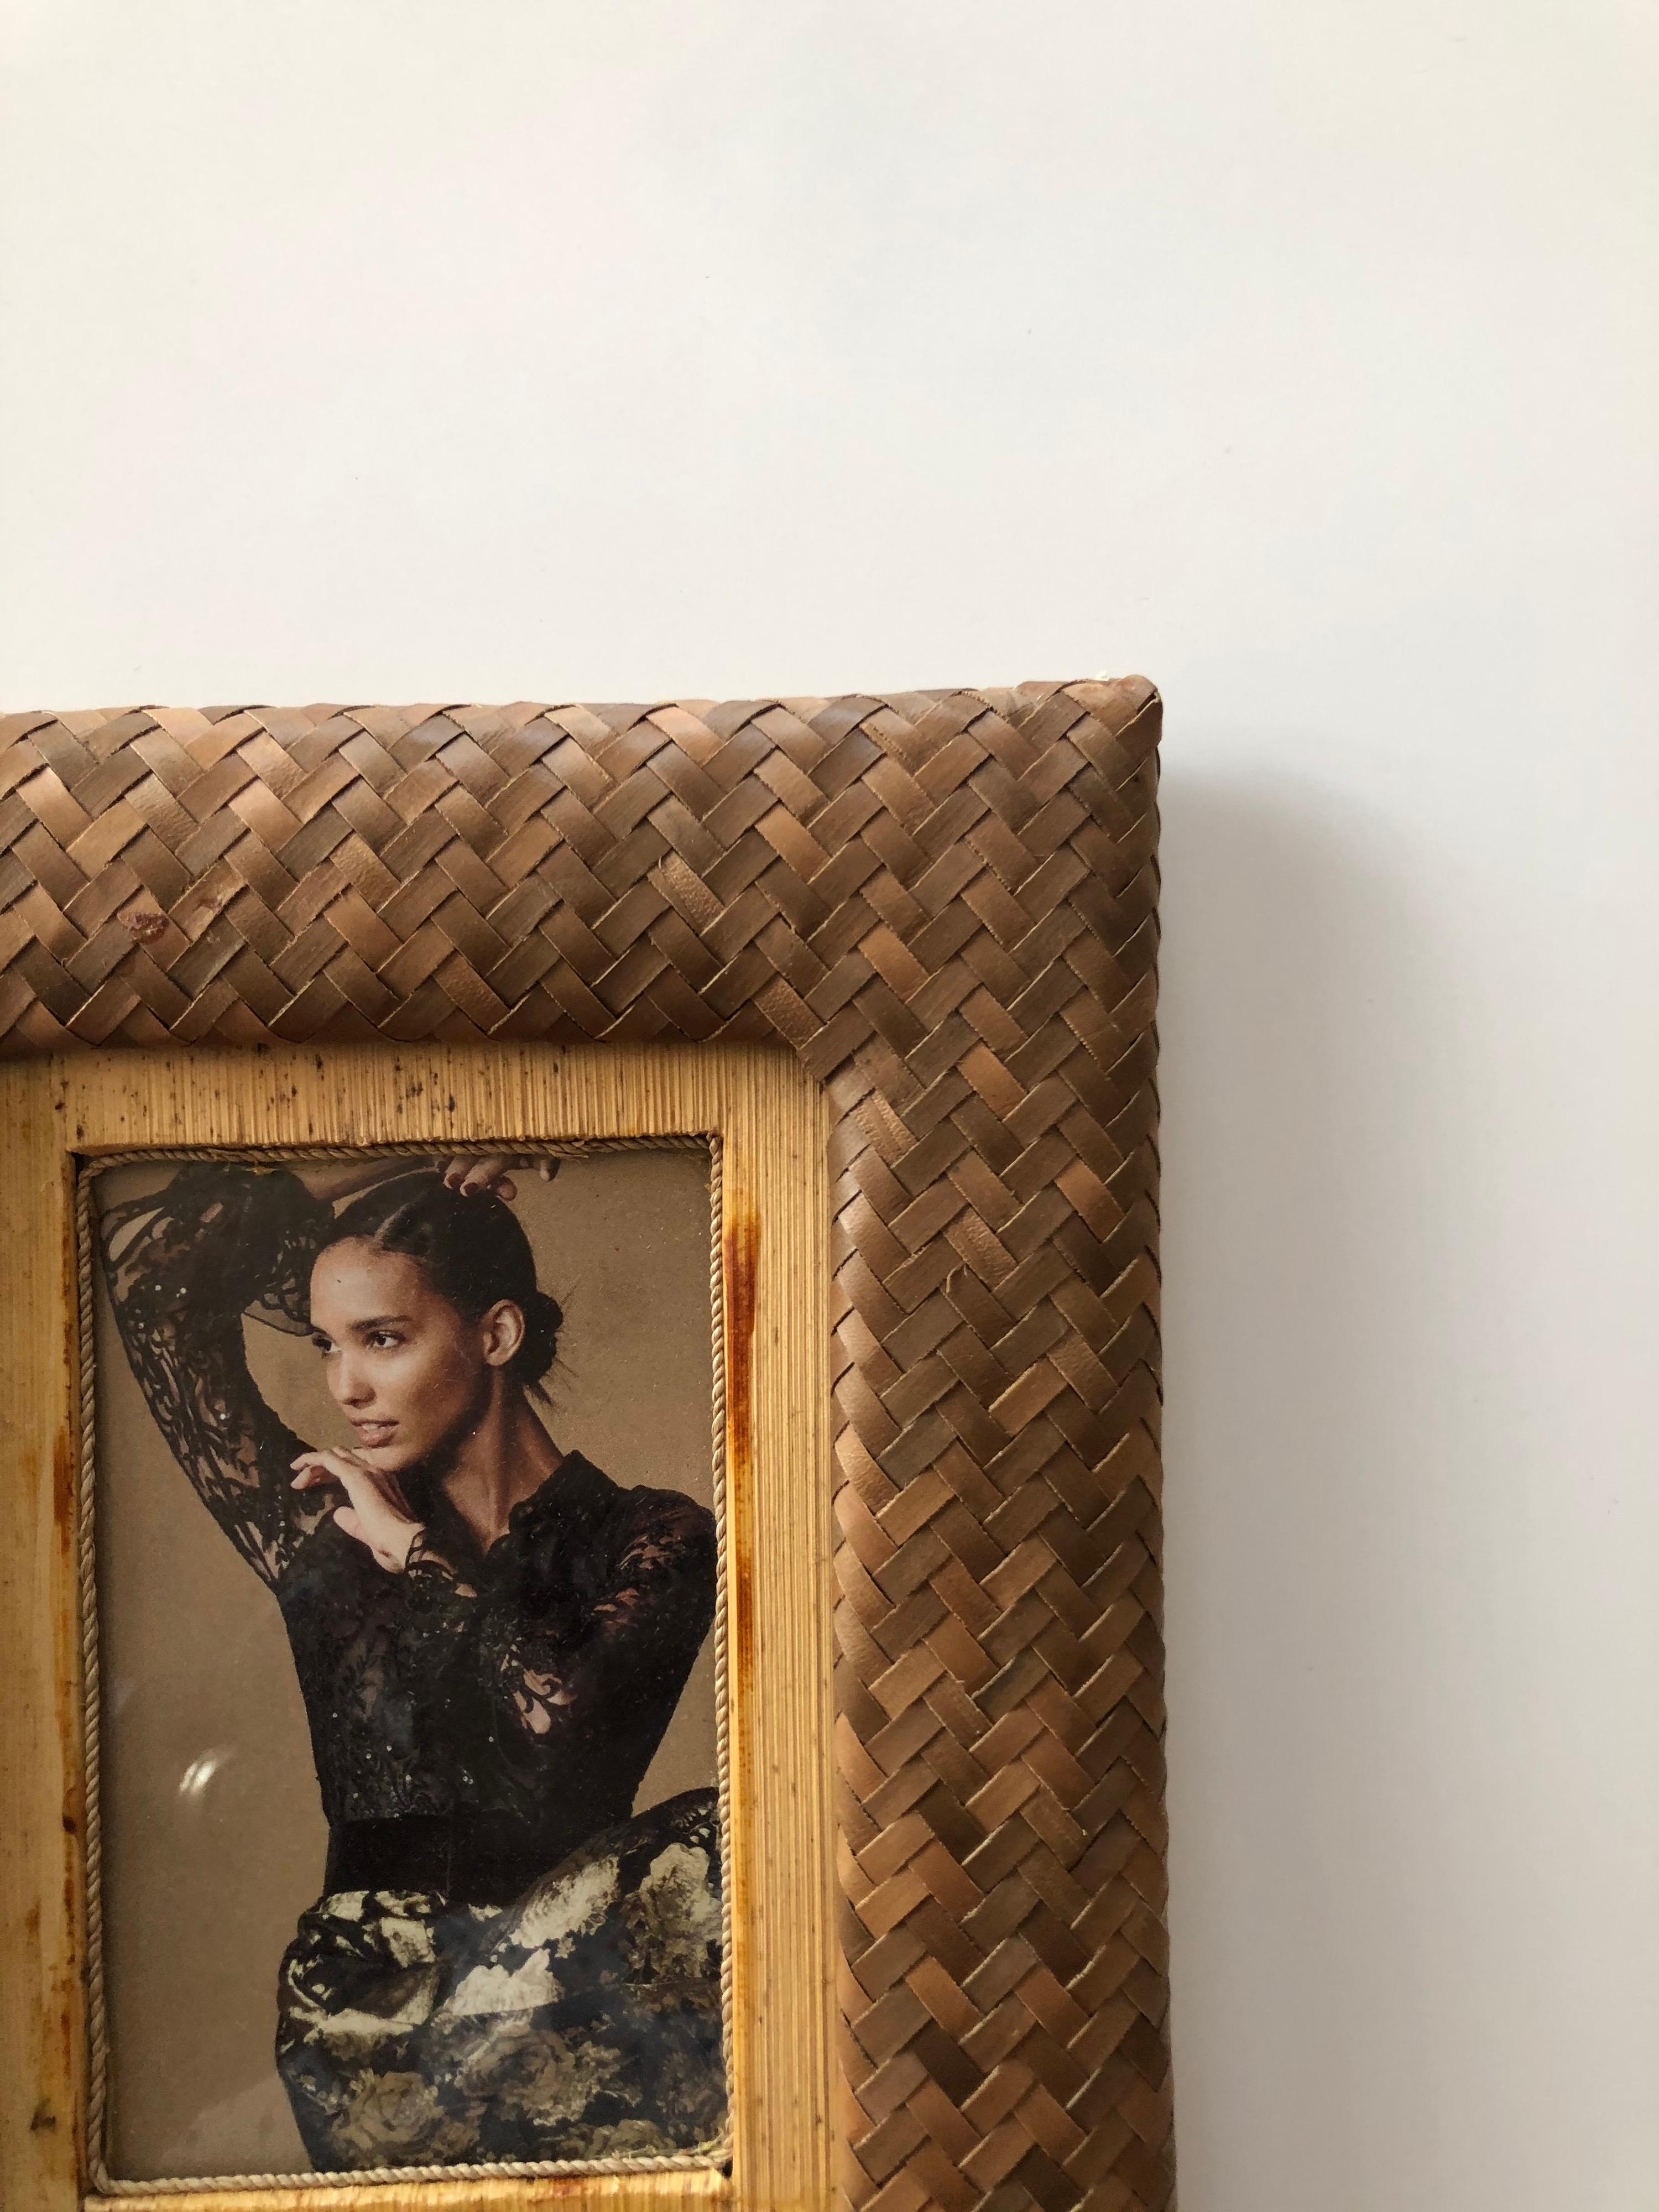 Vintage bamboo and rattan woven picture frame
Glass inset.
Size: 6 x 7.5 H x .25 D.